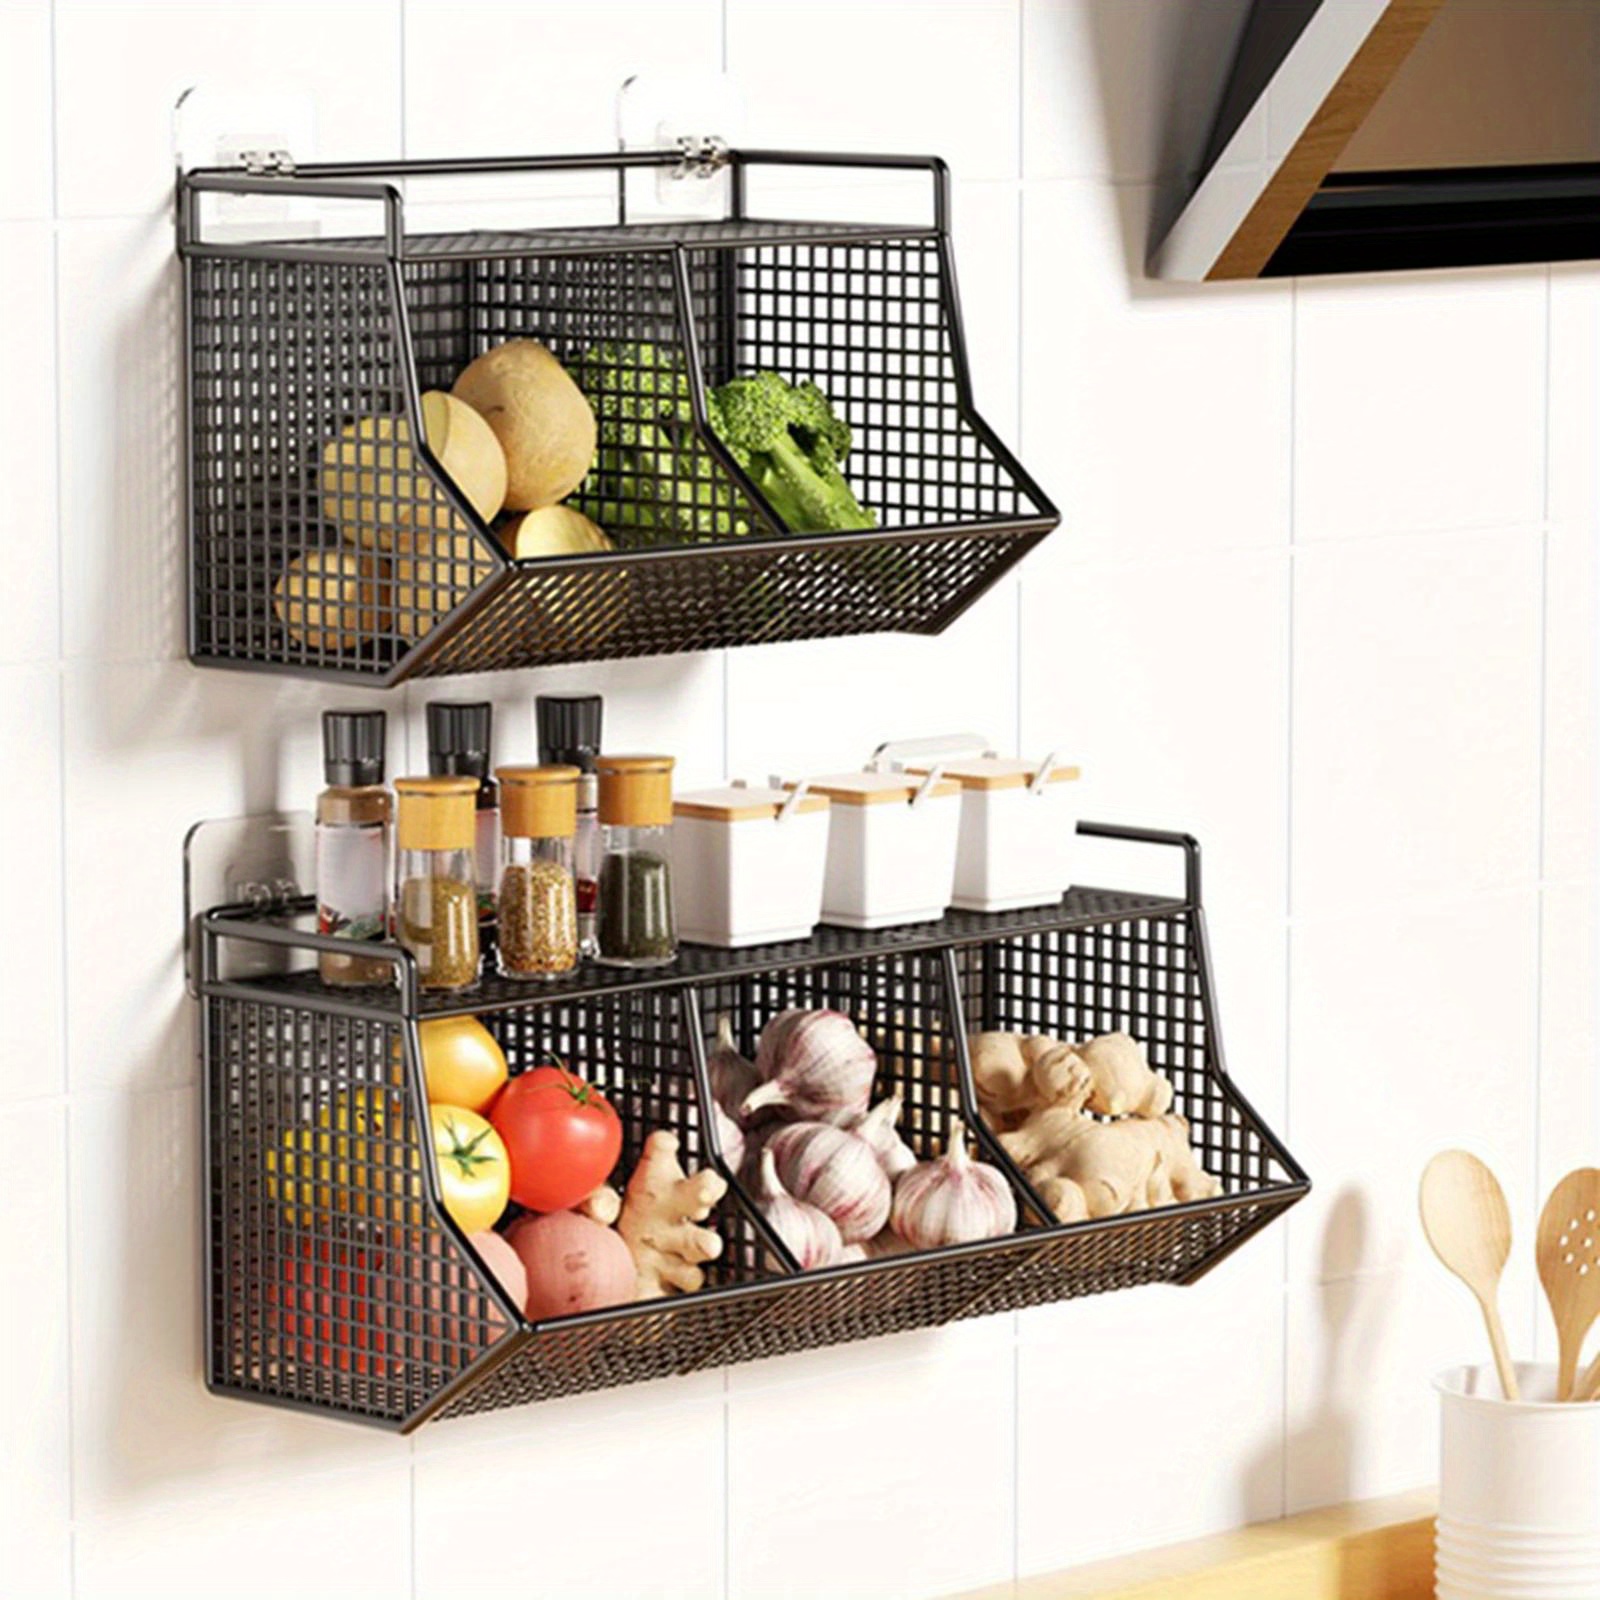 

1pc Metal Hanging Storage Basket, Luxurious Style Kitchen Organizer, Wall-mounted Fruit Vegetable Holder, Space-saving Grocery Shelf, Easy To Install